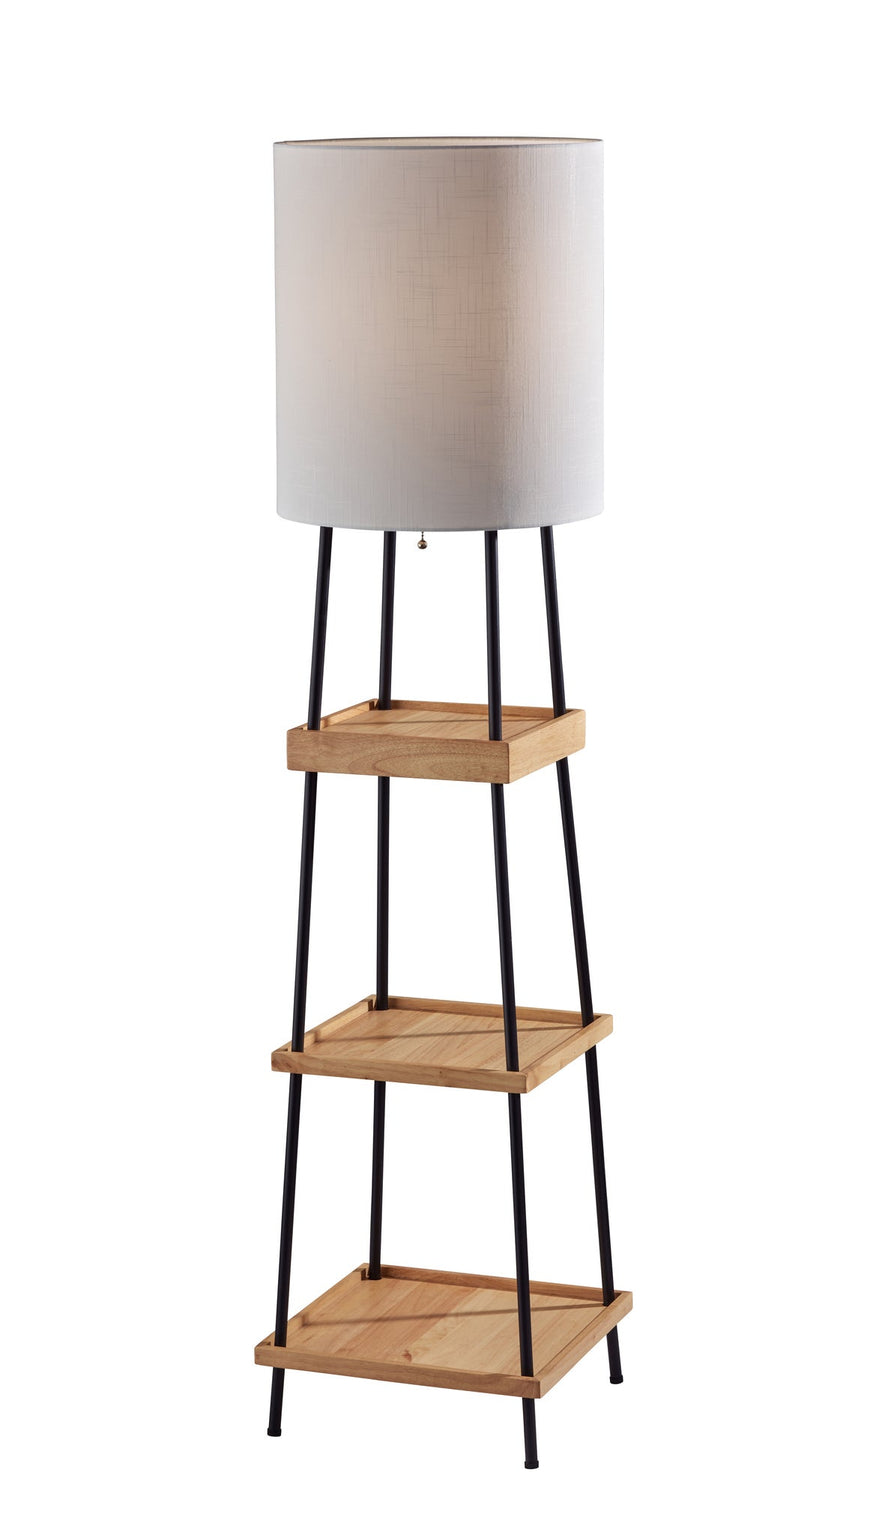 Henry AdessoCharge Shelf Floor Lamp- Natural Floor Lamps Black Finish w/ Natural wood Modern Chic Style image 1